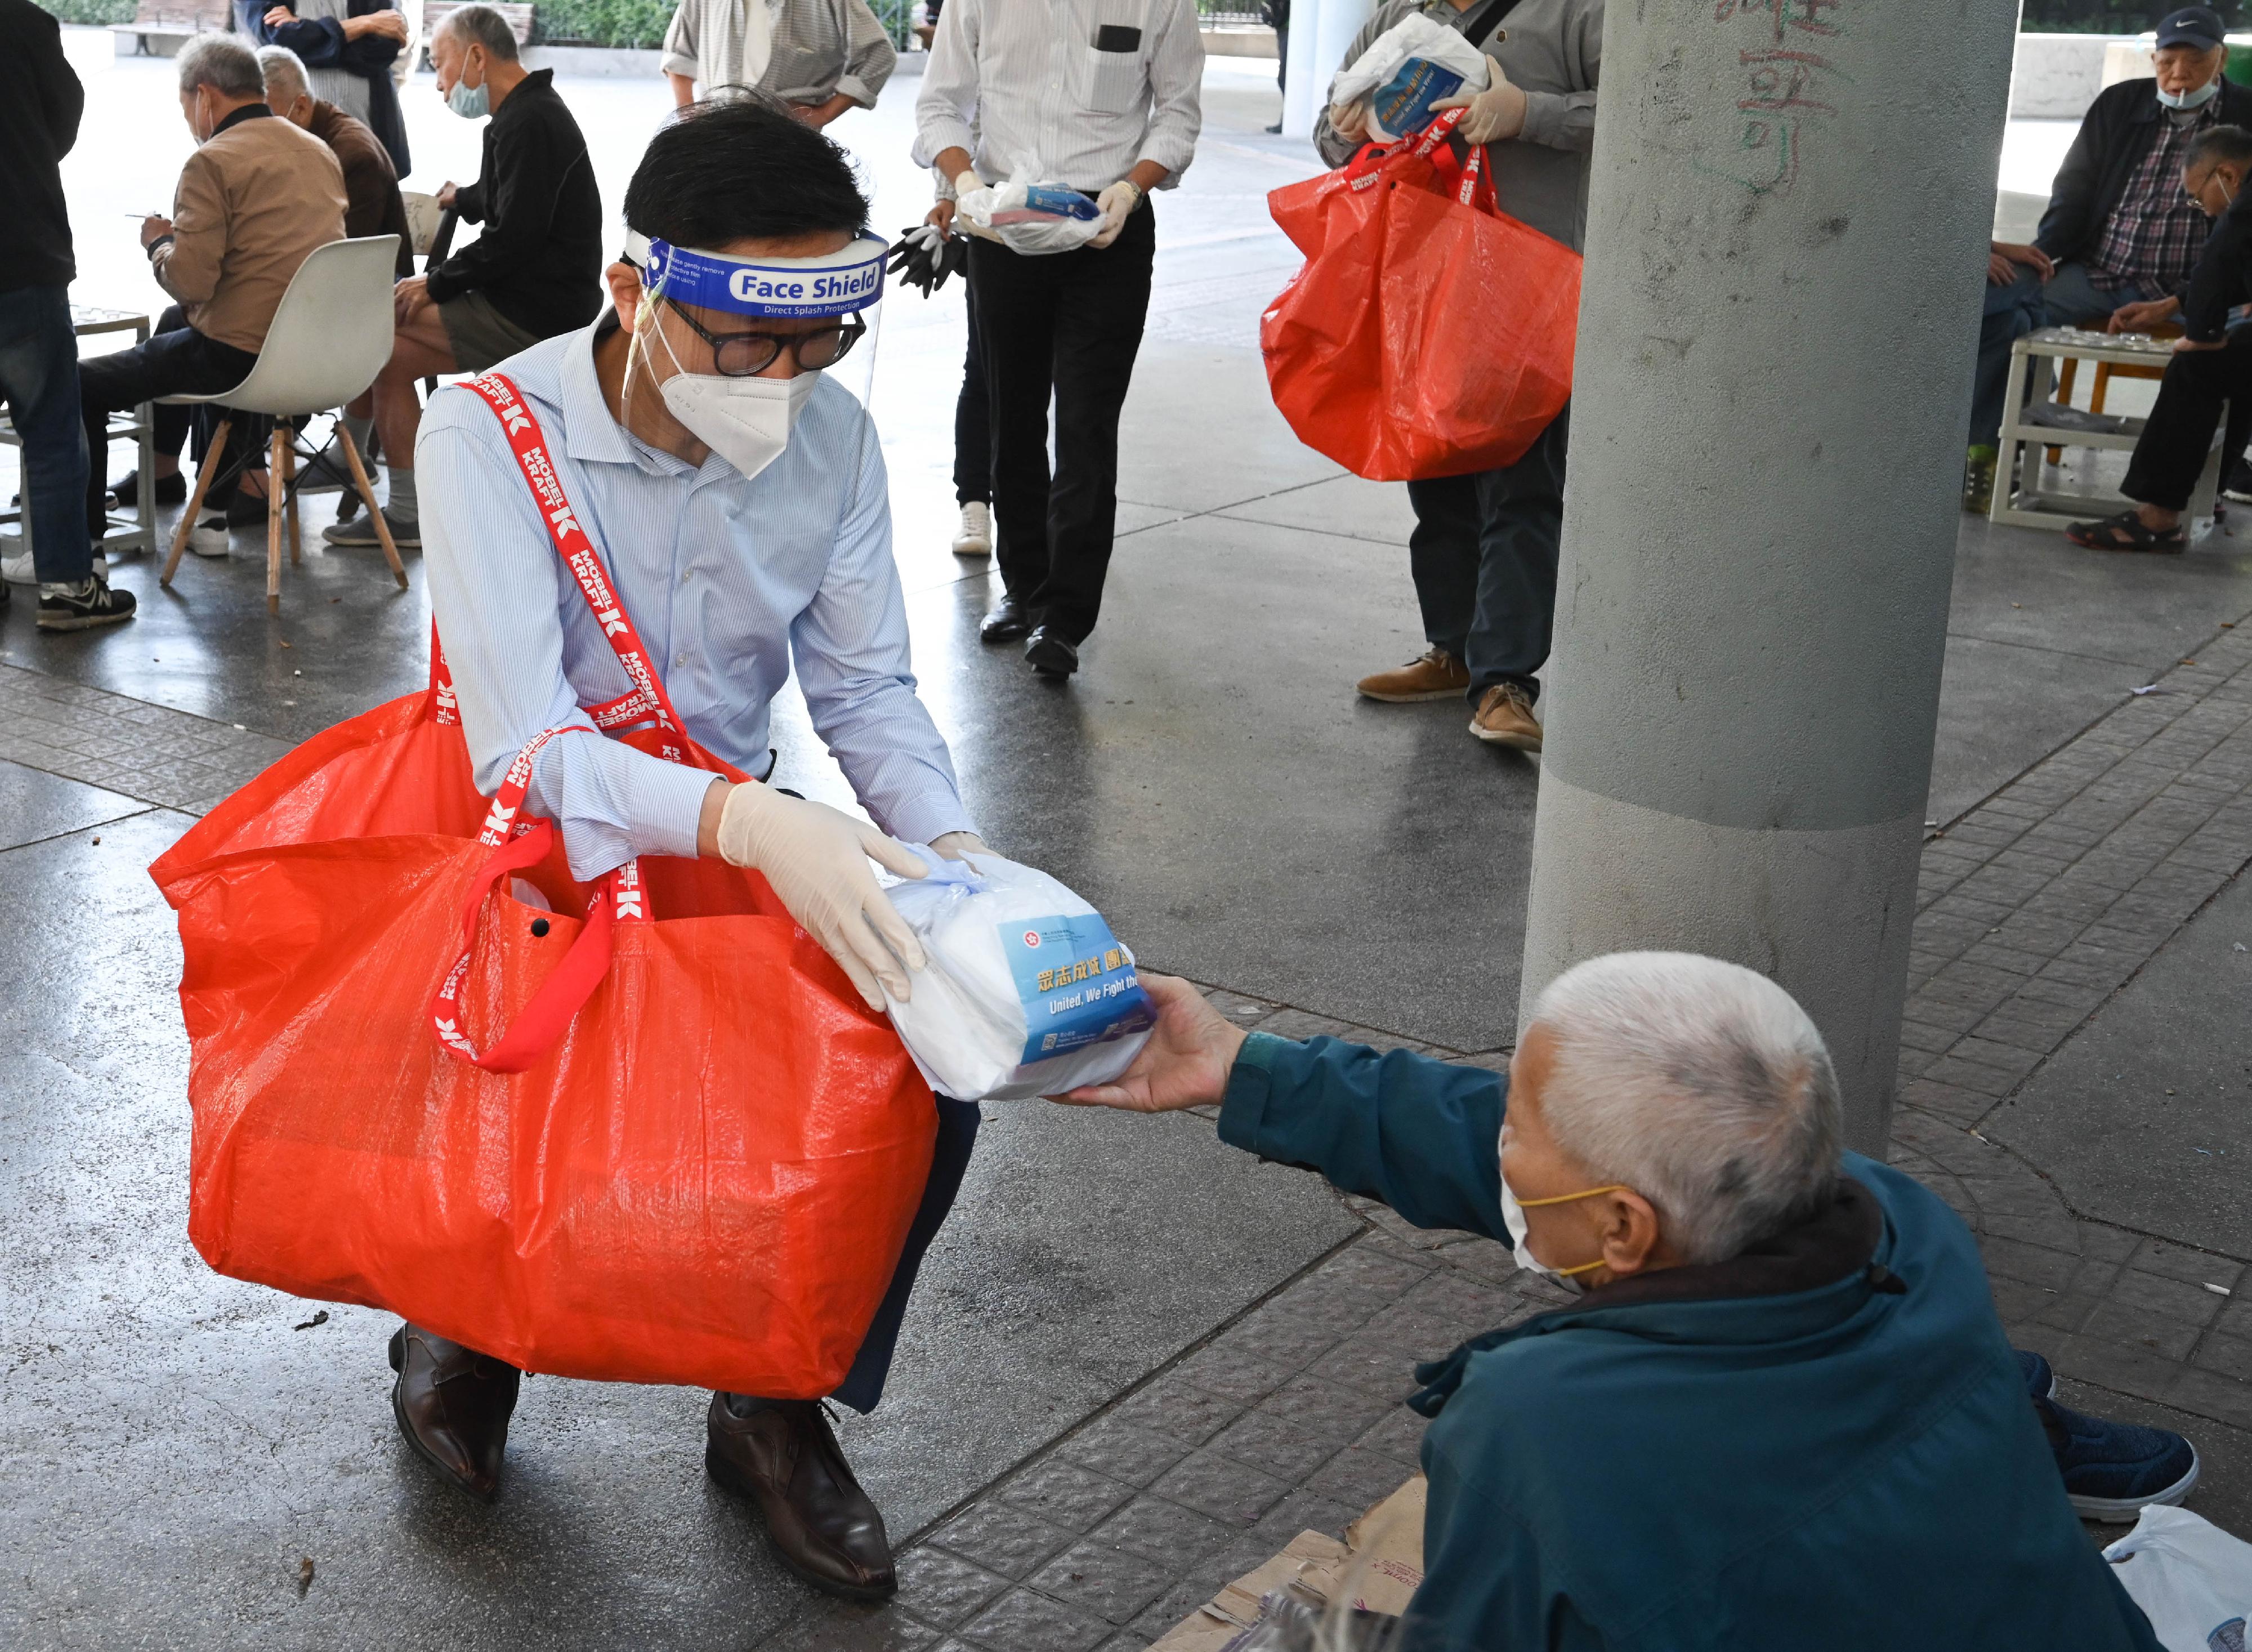 The Sham Shui Po District Office and the Yau Tsim Mong District Office, together with non-governmental organisations, distributed anti-epidemic service bags to street sleepers on April 4. Picture shows the District Officer (Sham Shui Po), Mr Paul Wong, distributing an anit-epidemic service bag to a street sleeper.
